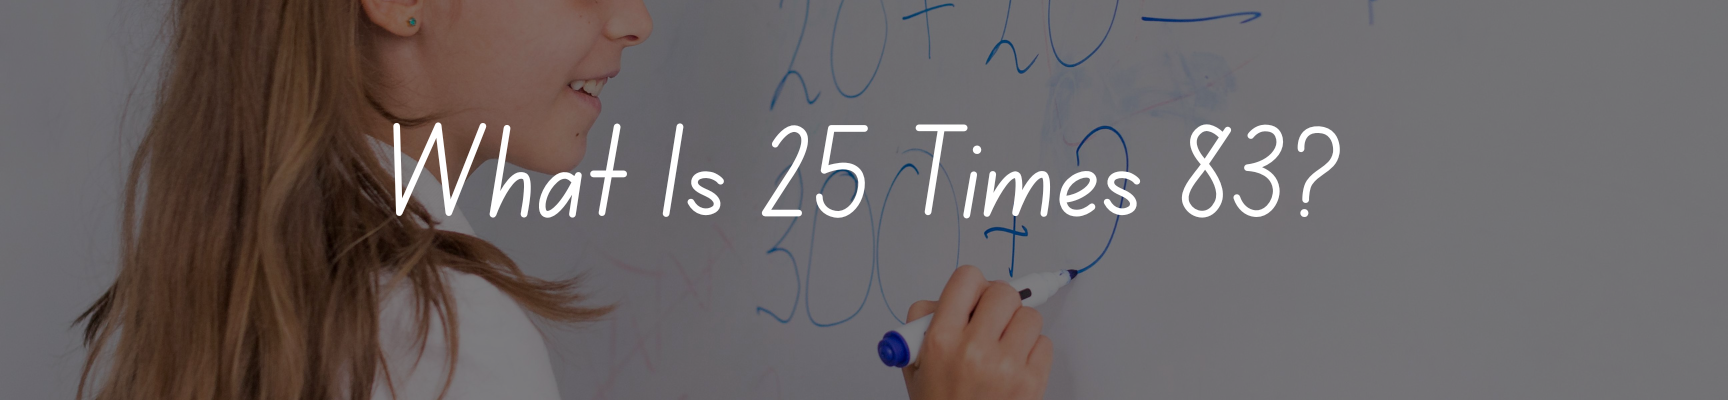 What Is 25 Times 83?